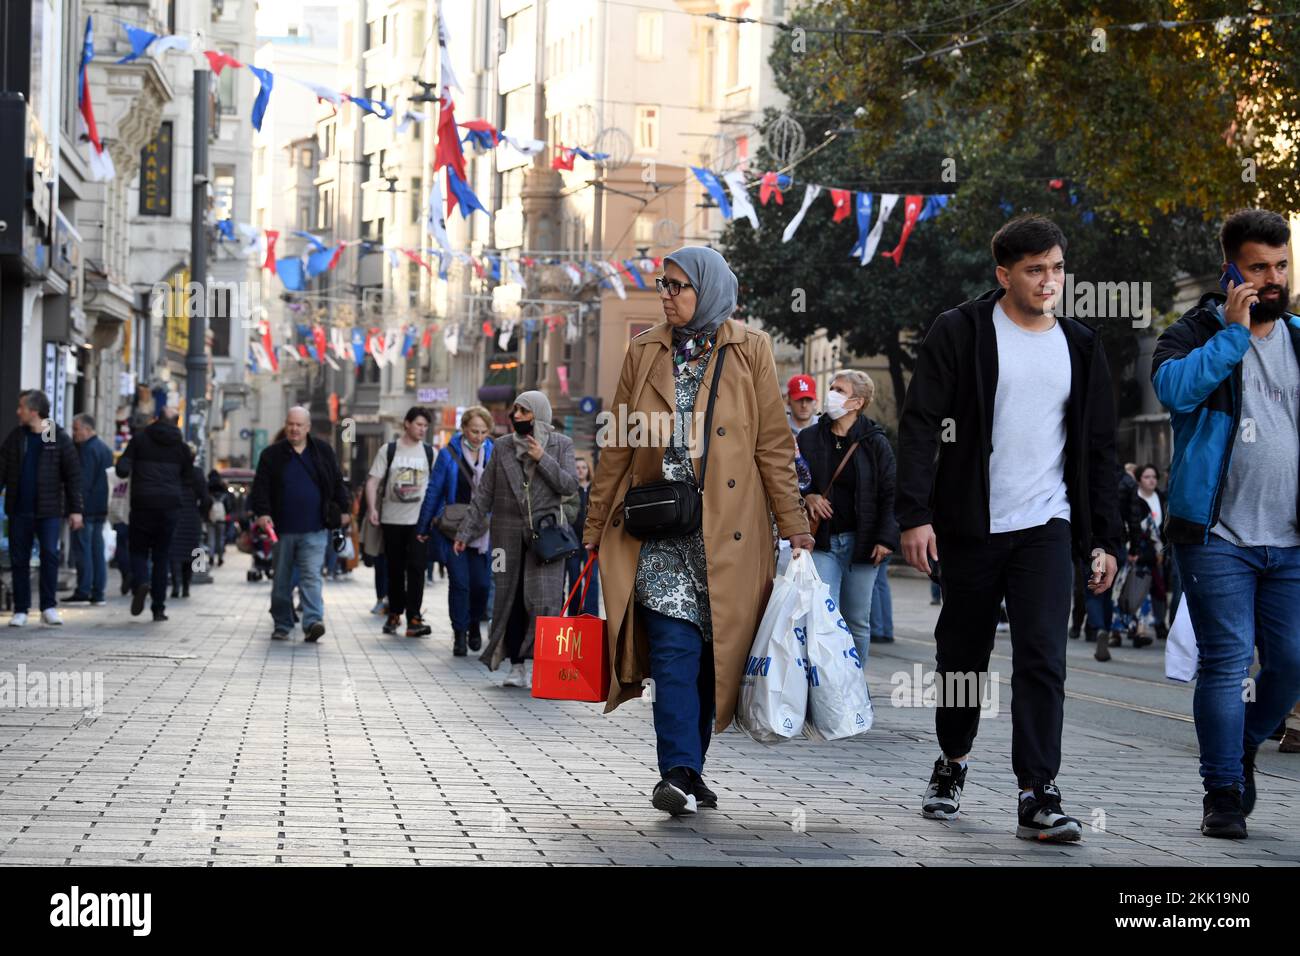 (221125) -- ISTANBUL, Nov. 25, 2022 (Xinhua) -- Pedestrians walk on the Istiklal Avenue in Istanbul, T¨¹rkiye, Nov. 22, 2022.  Days after the bloody explosion that rocked the busiest pedestrian avenue in Istanbul, additional security measures have been taken with a heavy presence of police patrolling the area.    The Istiklal Avenue, lined with stores of famous brands, cafes, and bars, is flooded with people as usual. 'Many additional security measures have been taken since the bomb explosion,' Haydar Ali Yildiz, mayor of Beyoglu district, told reporters on Tuesday.   On Nov. 13, six people we Stock Photo